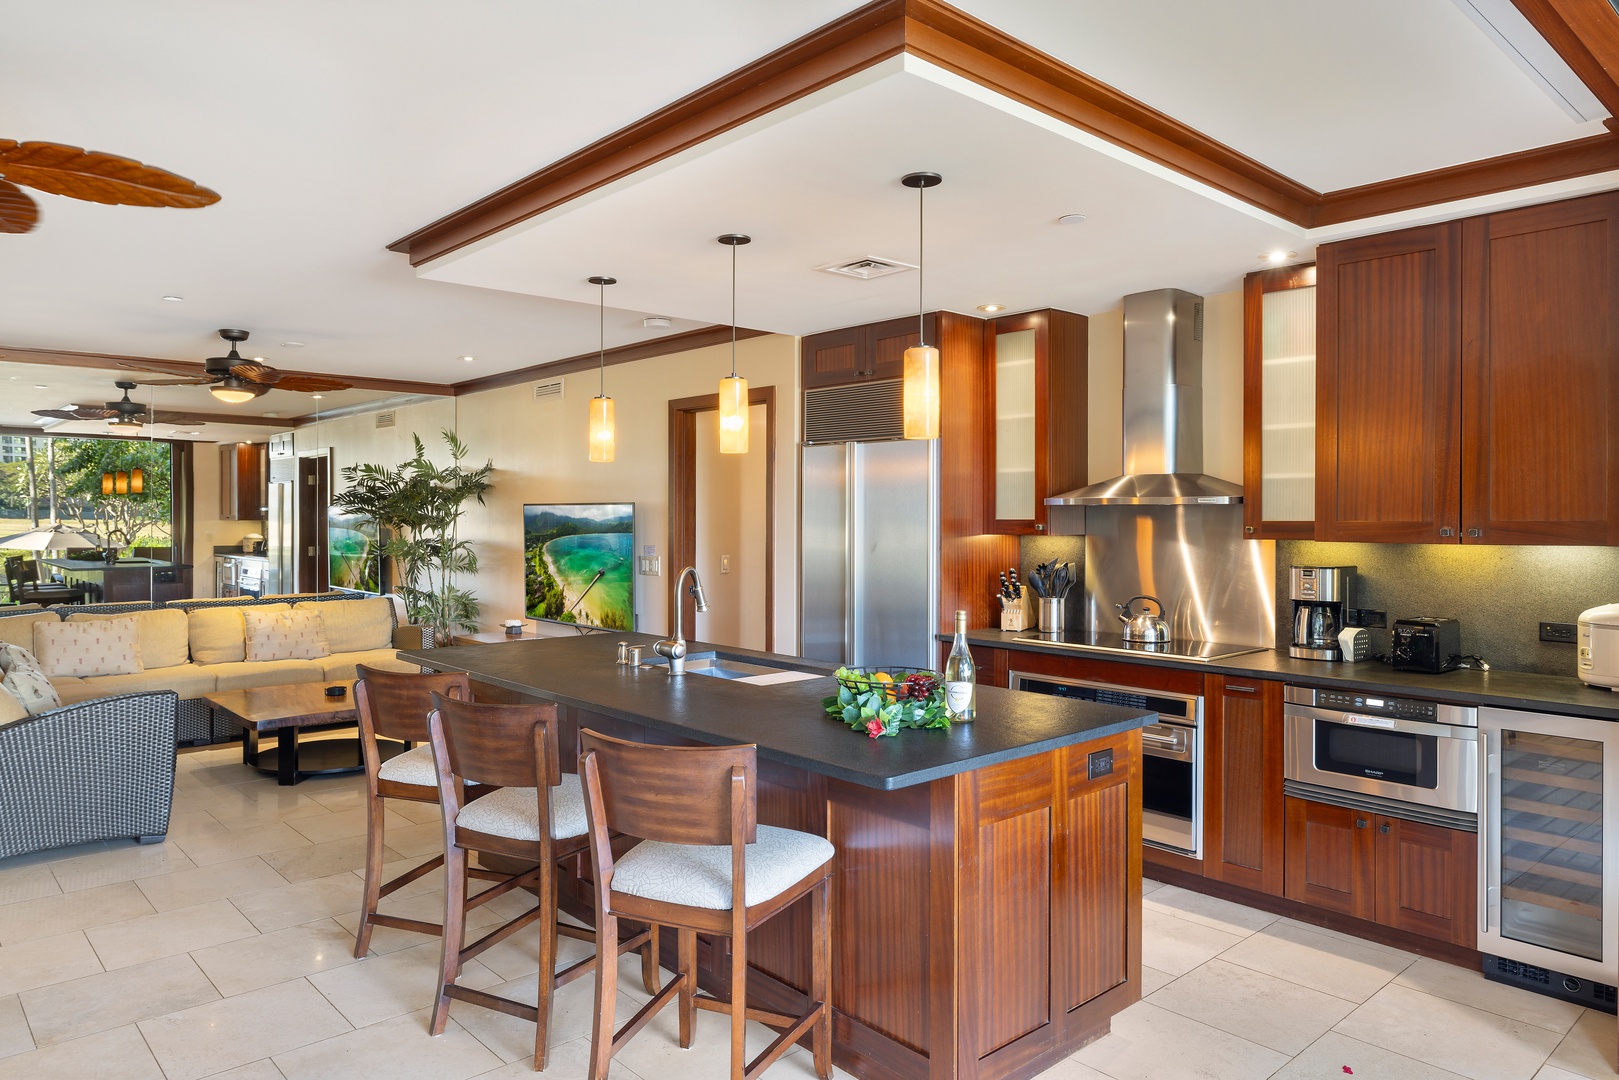 Kapolei Vacation Rentals, Ko Olina Beach Villas B107 - Alternate View of Kitchen with top of the line appliances and breakfast bar.